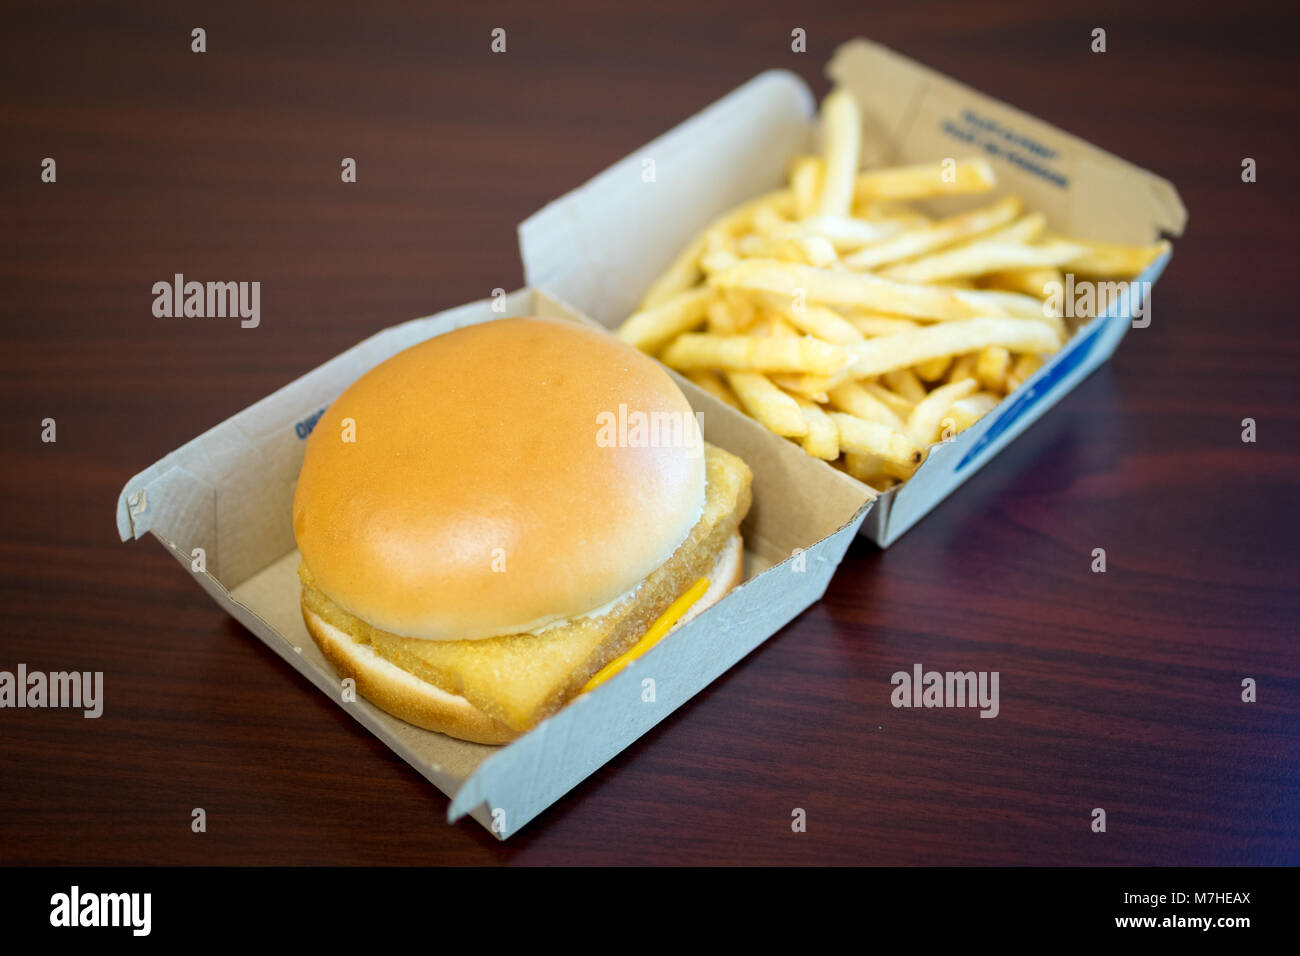 A McDonald's Filet-O-Fish, a fish sandwich, and a small french fries. Stock Photo